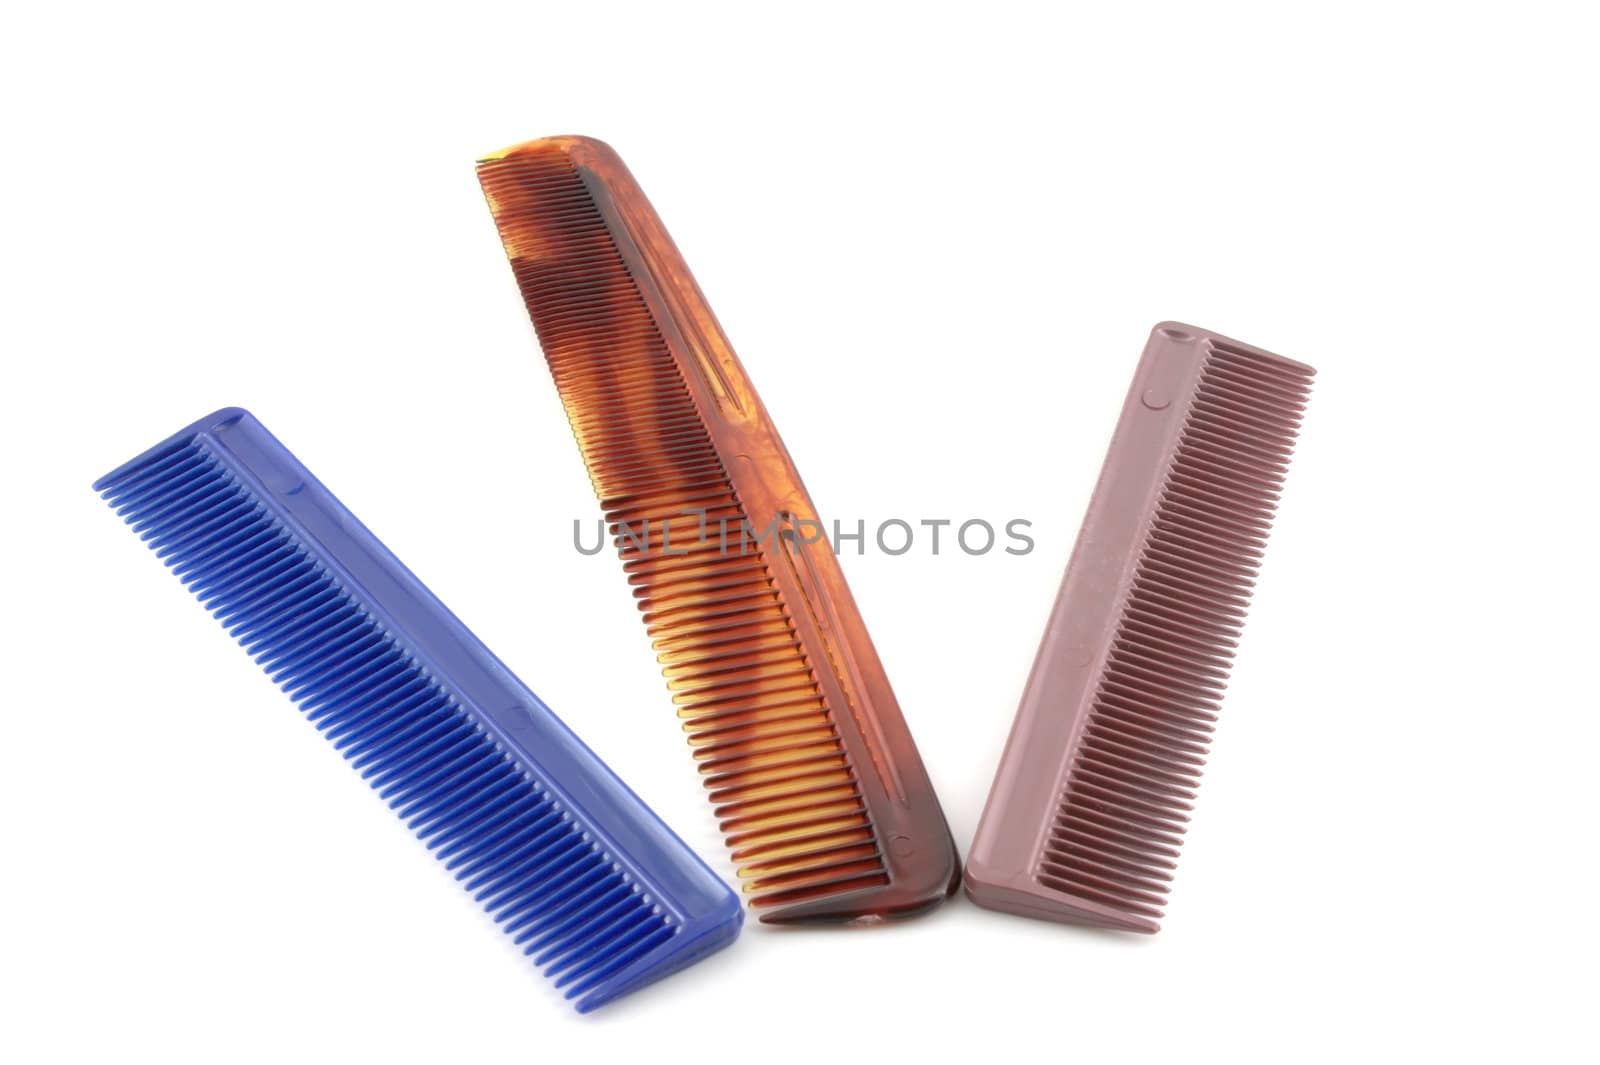 Plastic color combs by sergpet